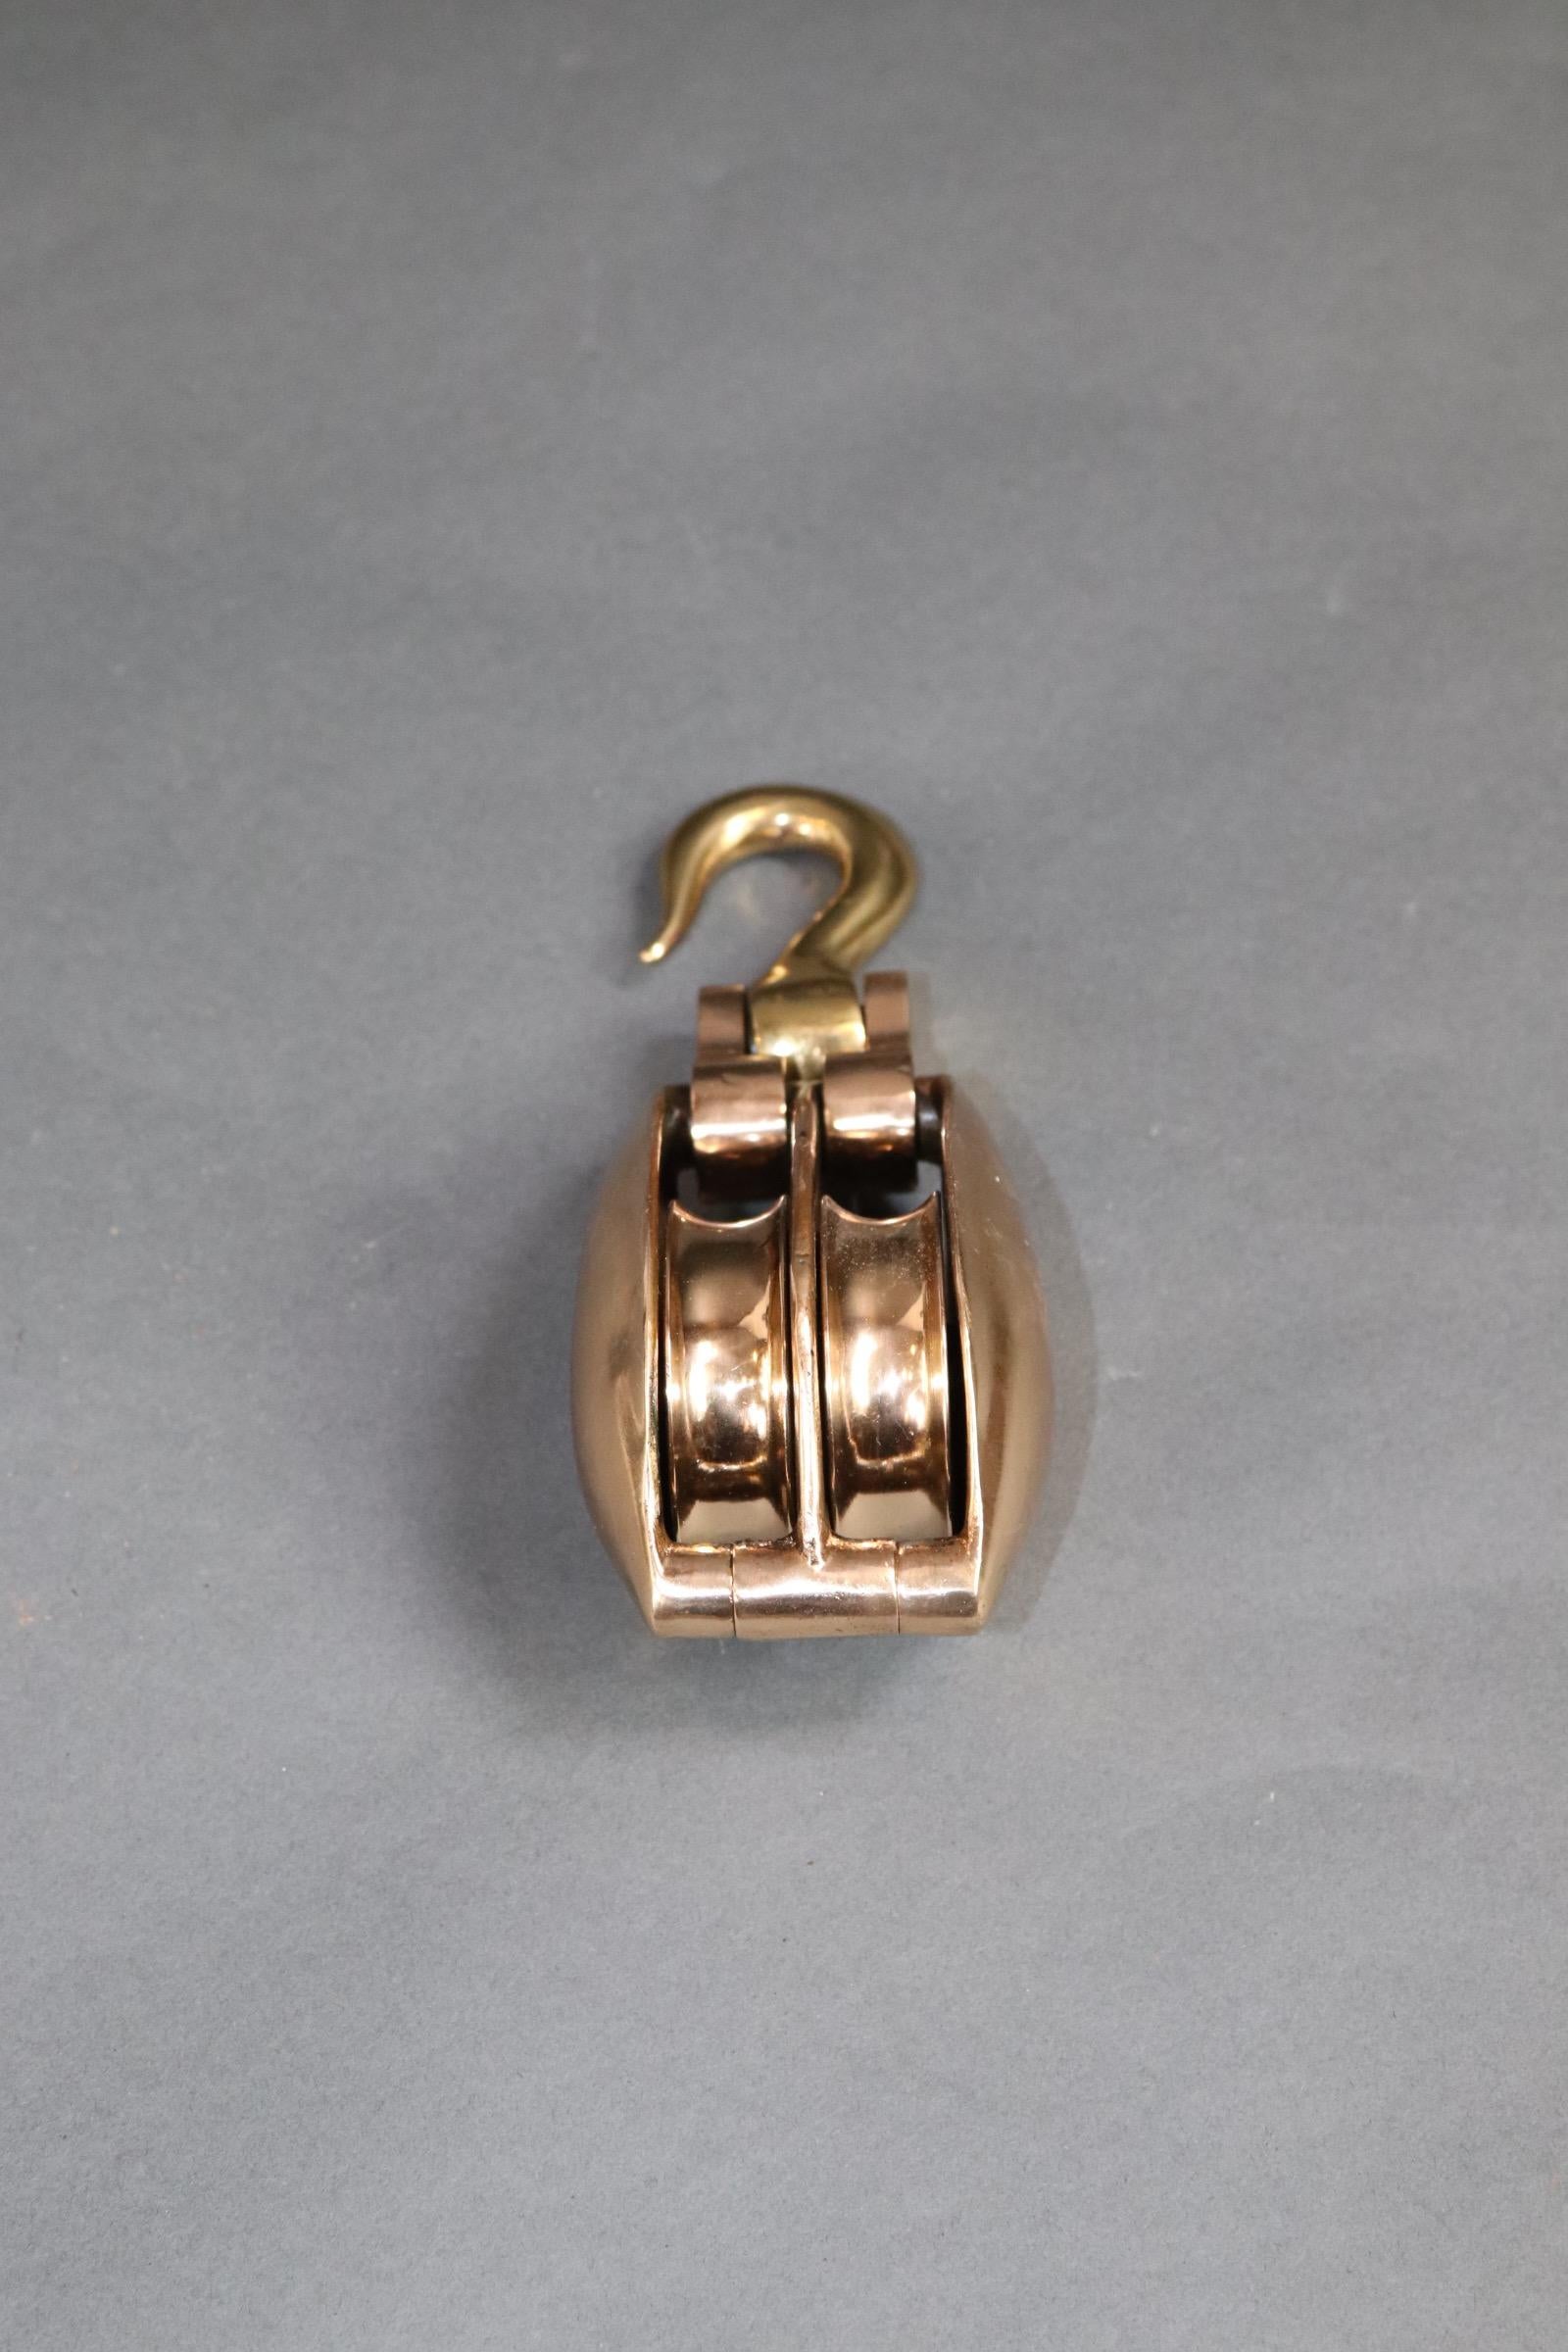 Brass Double Sheave Herreshoff Yacht Pulley In Good Condition For Sale In Norwell, MA